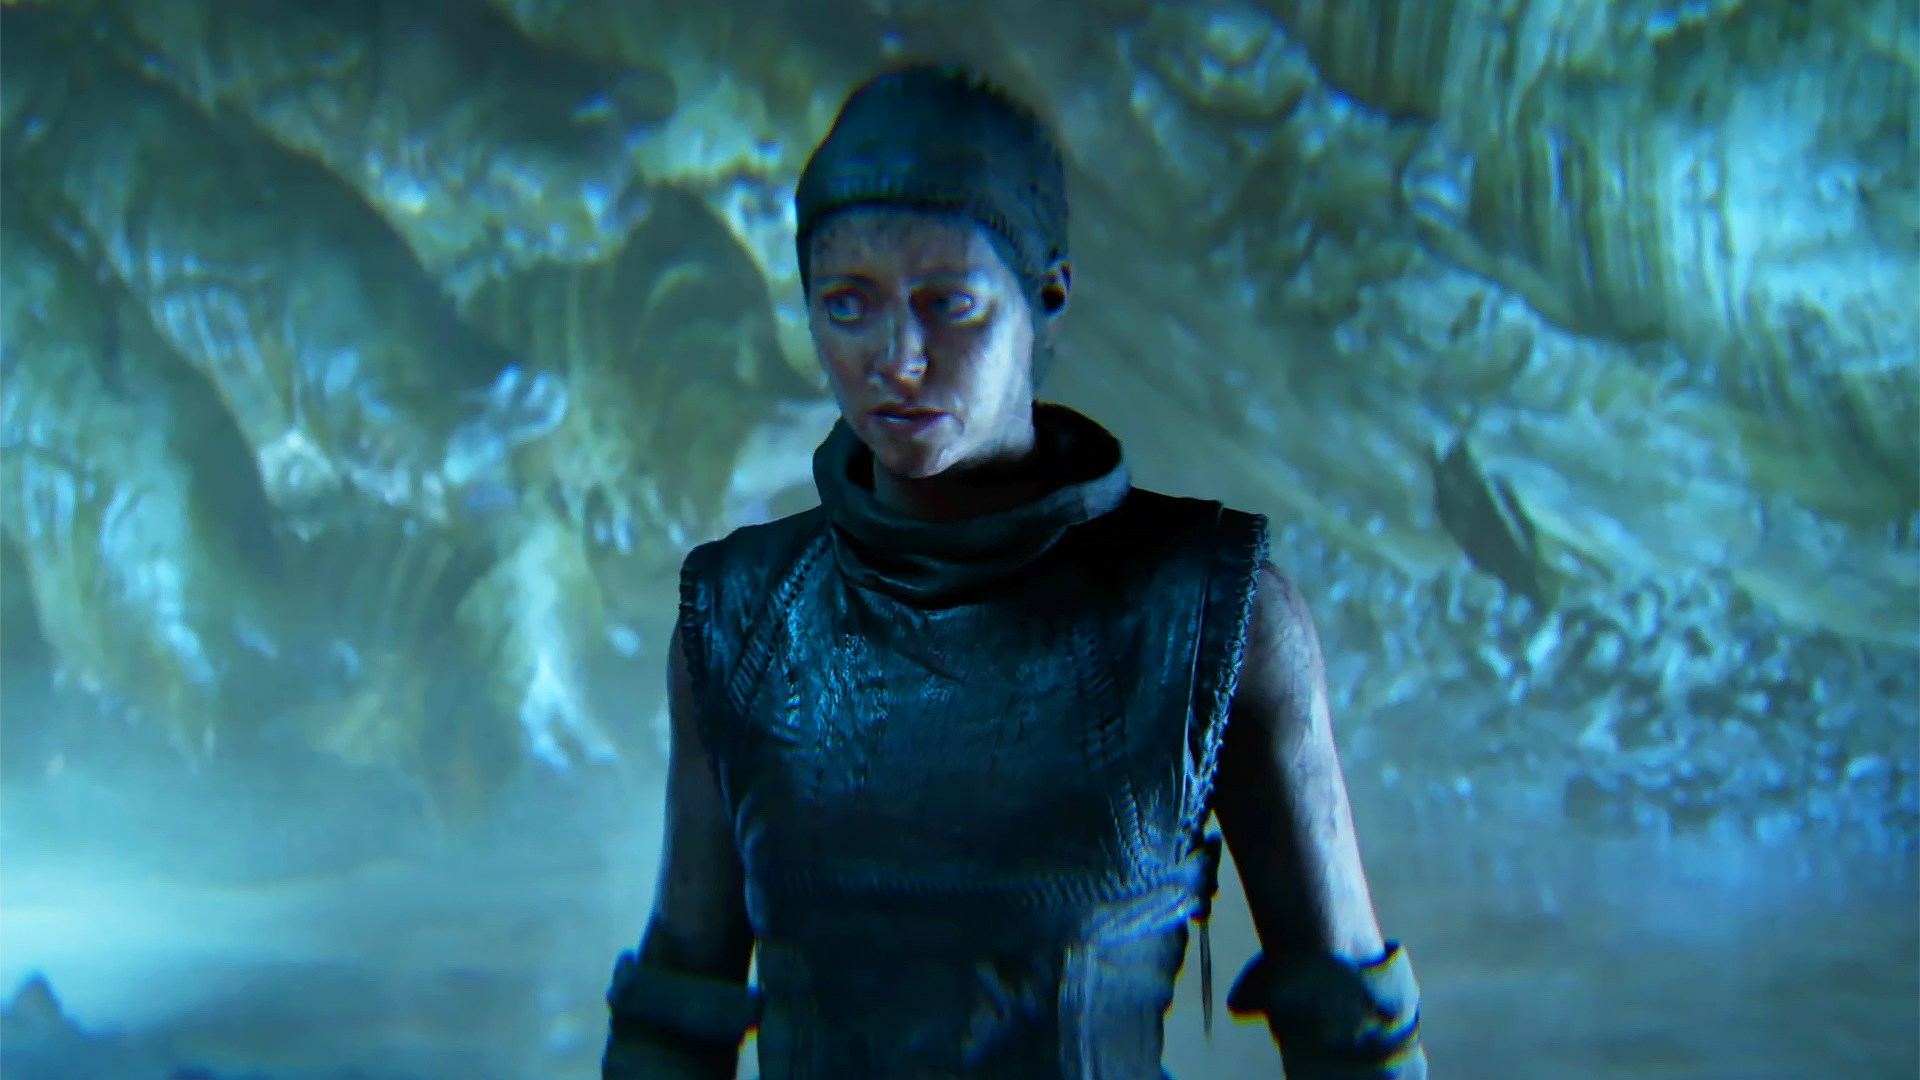  Sorry folks, Hellblade 2's new trailer doesn't have the Big Guy in it 